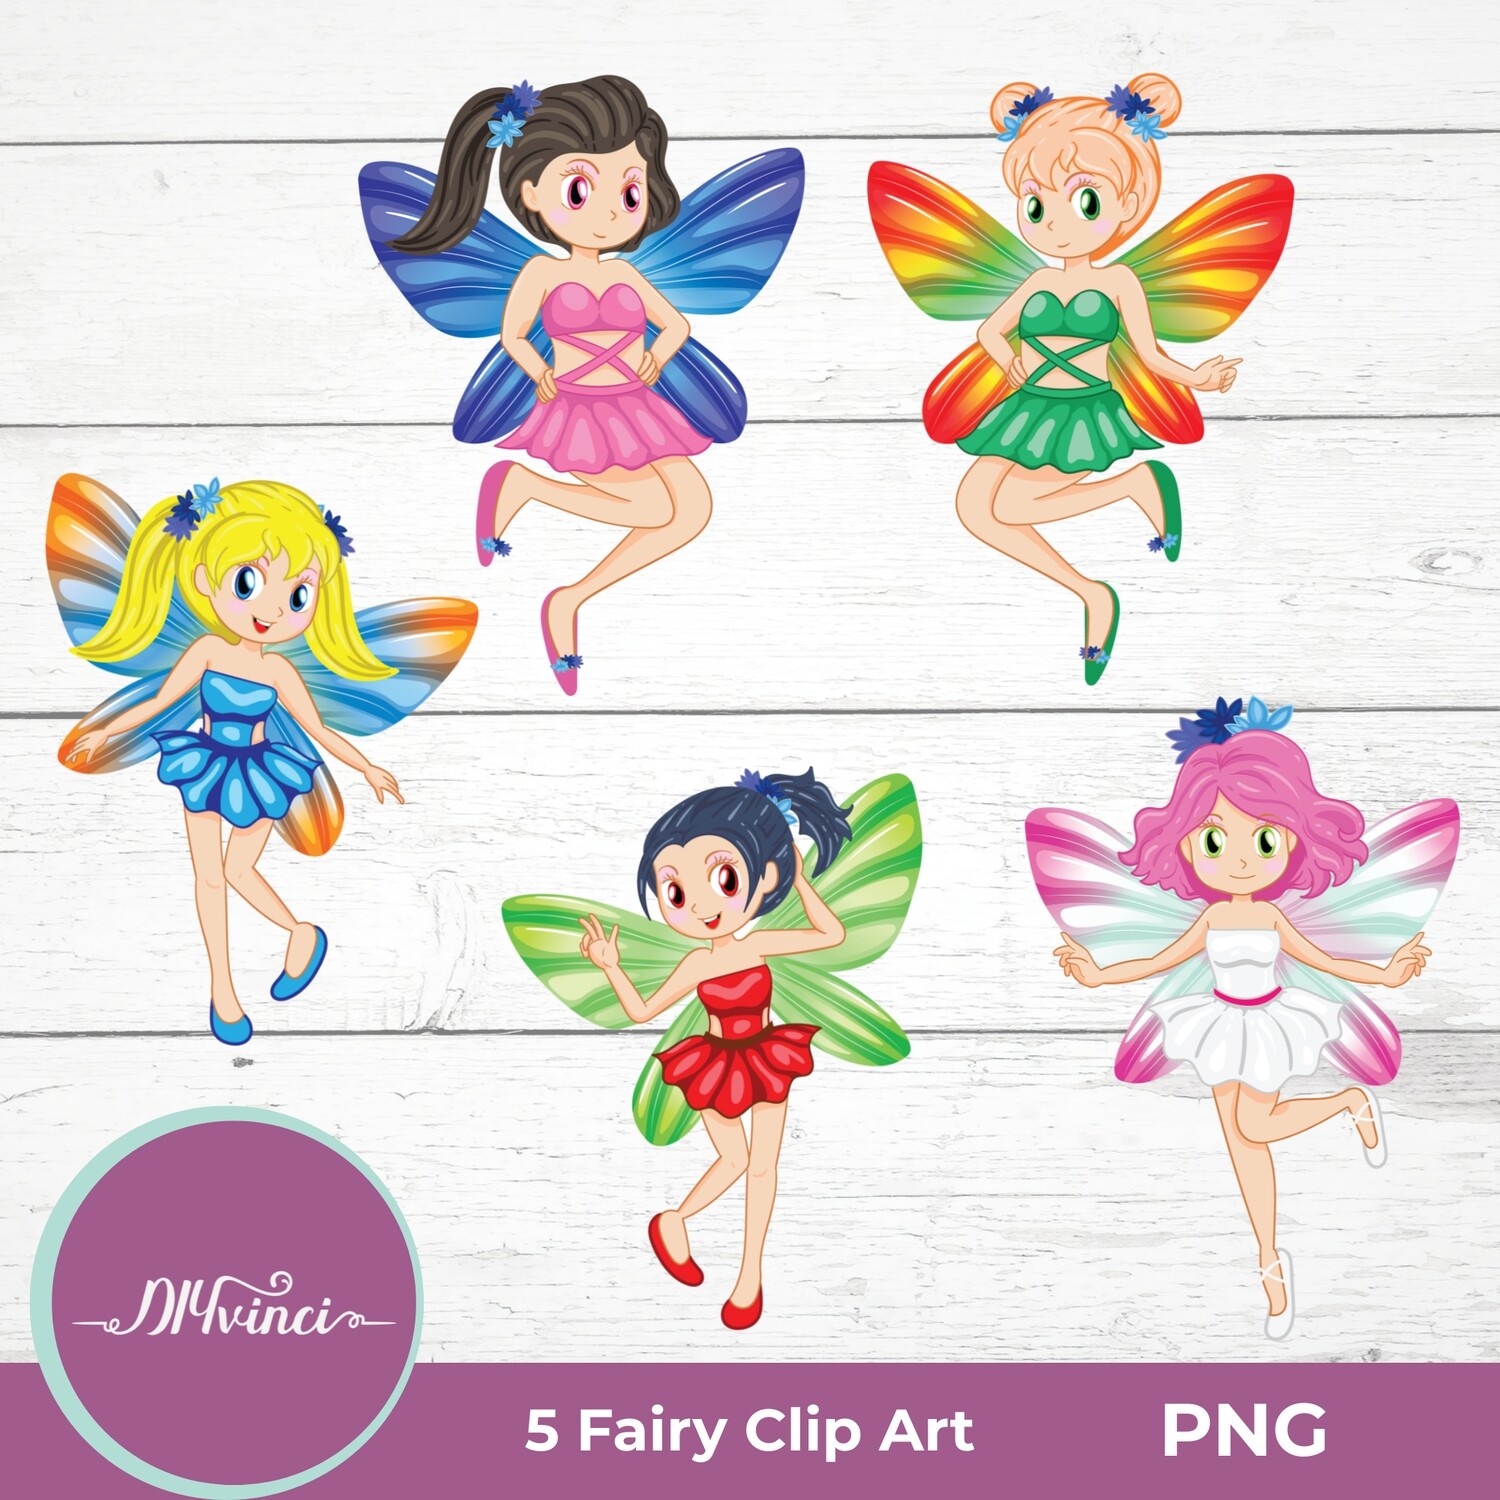 5 Fairy Clip Art - PNG - Personal & Commercial Use